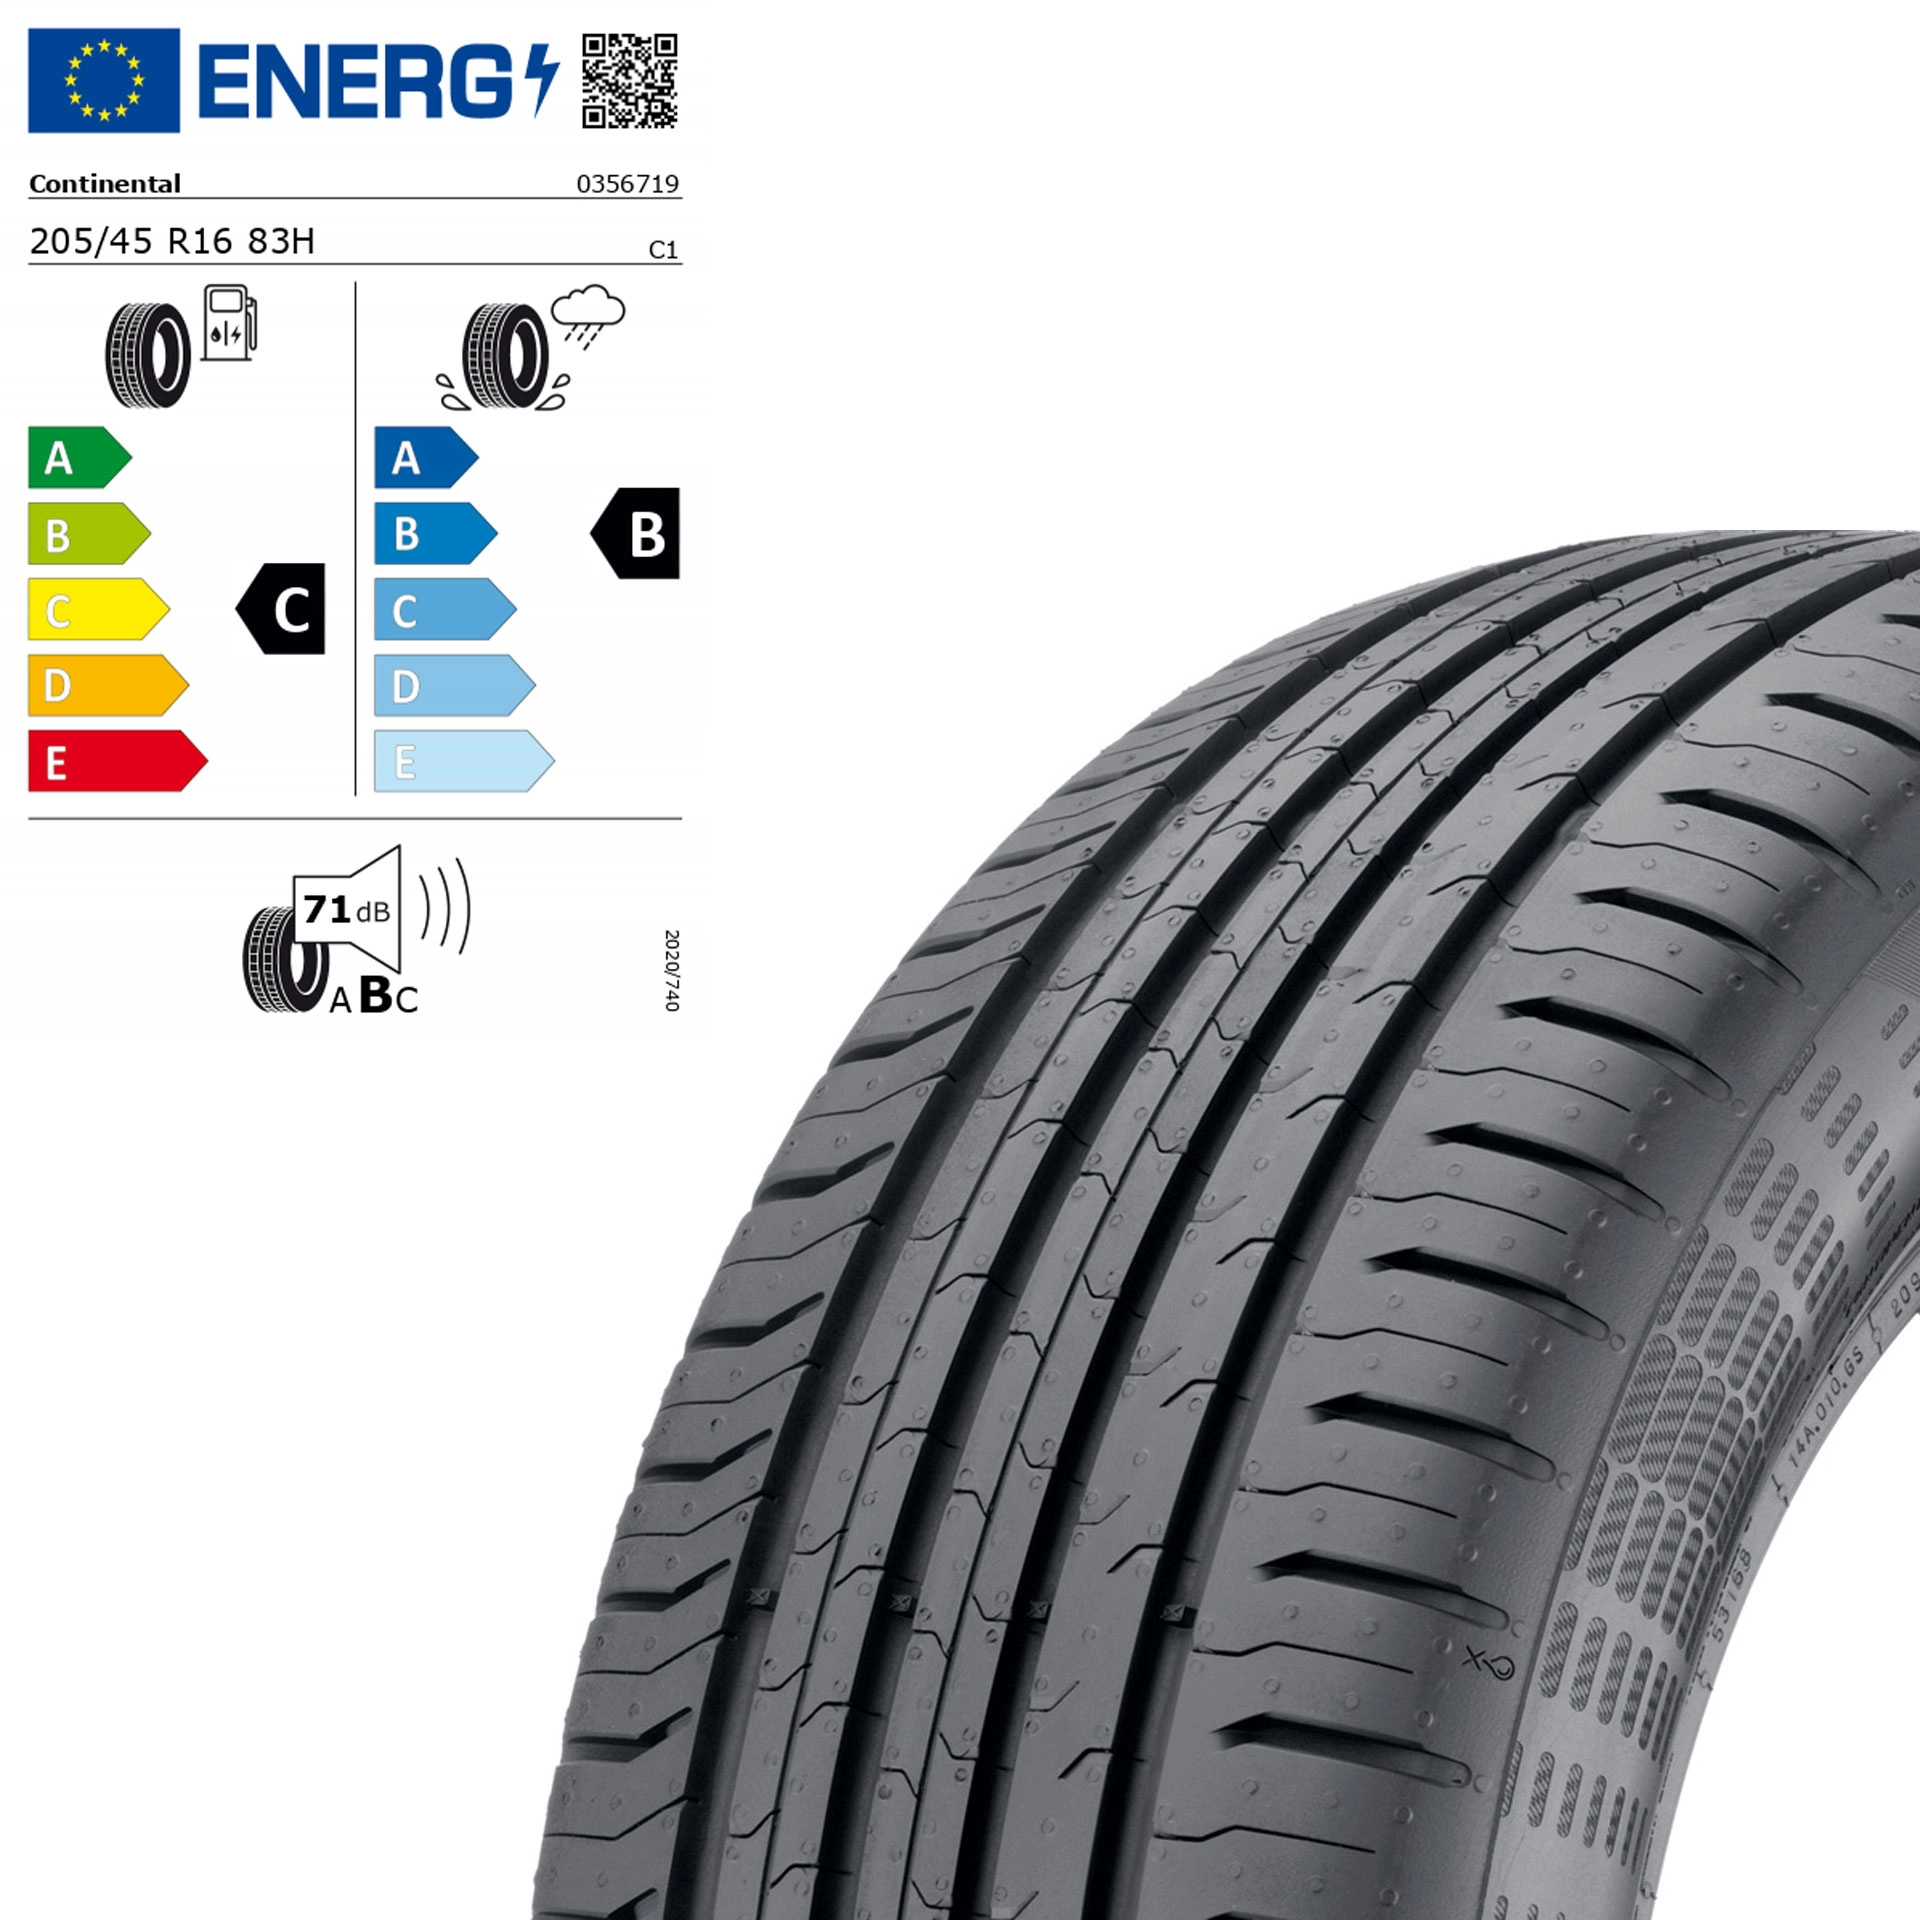 205/45 R16 83H Continental ContiEcoContact 5 - Sommerreifen Q44003111009A